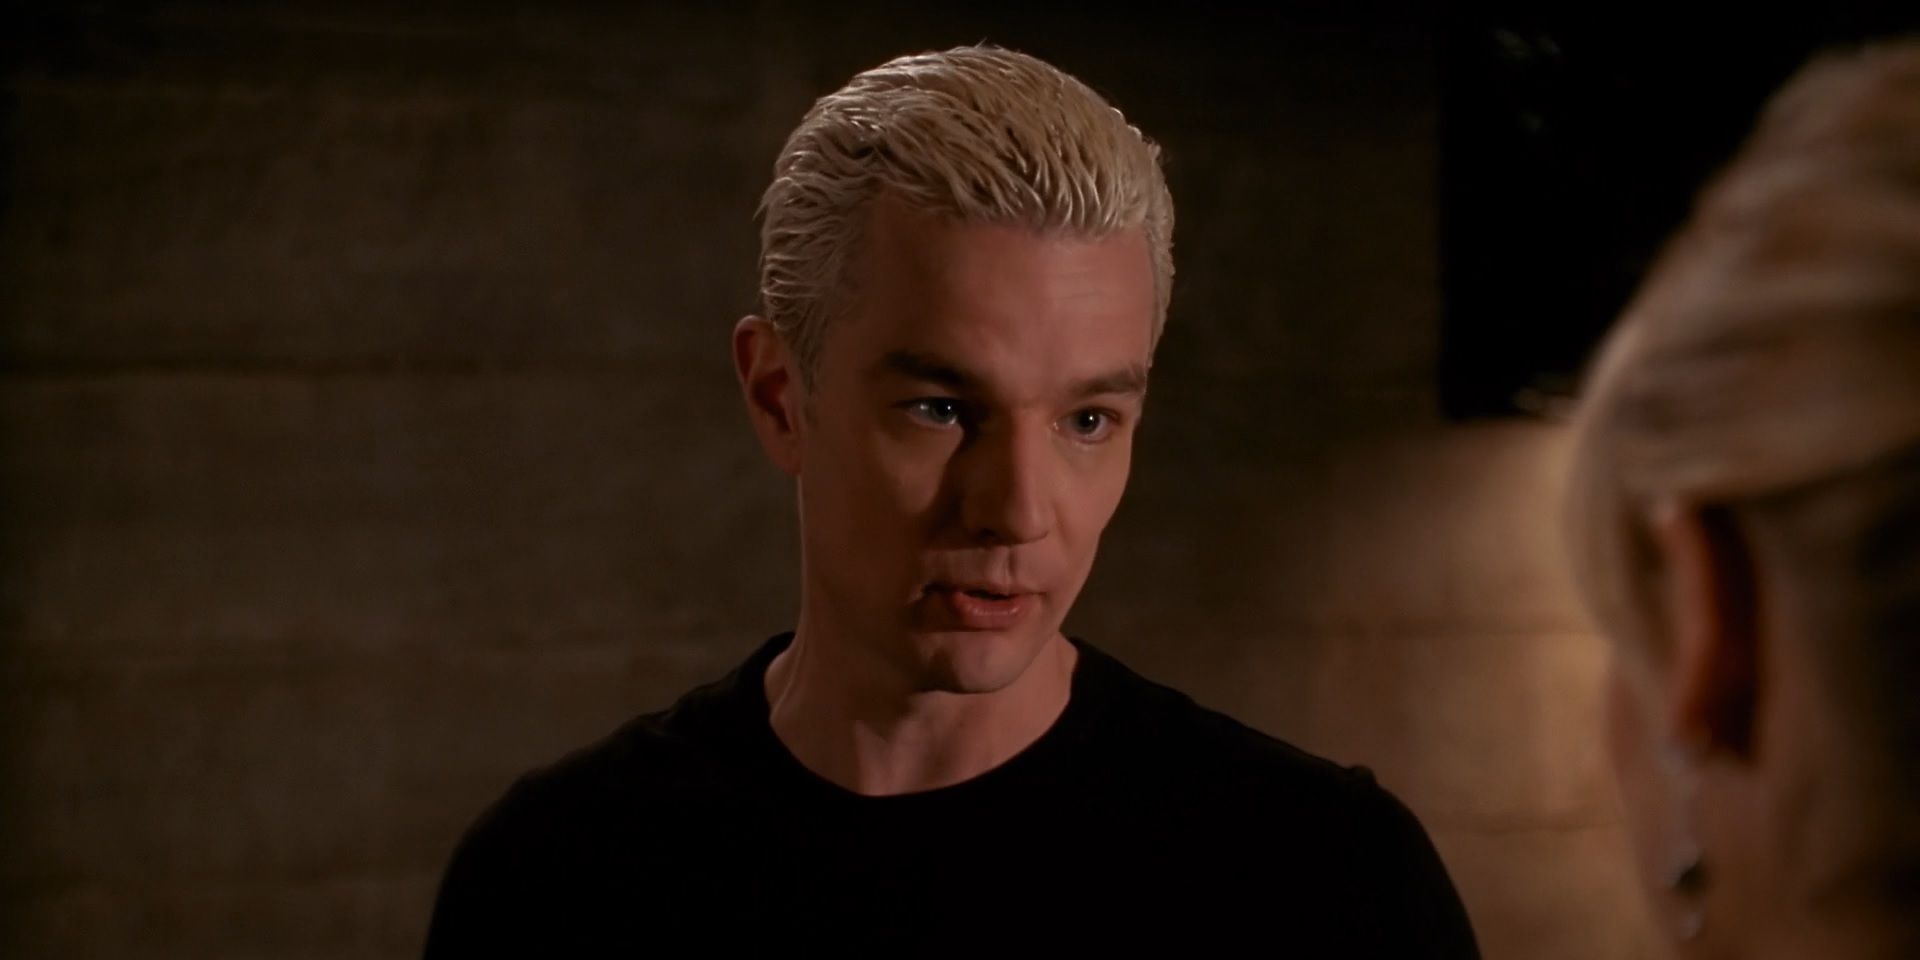 Buffy The Vampire Slayer: Why Does Spike Turn Good?